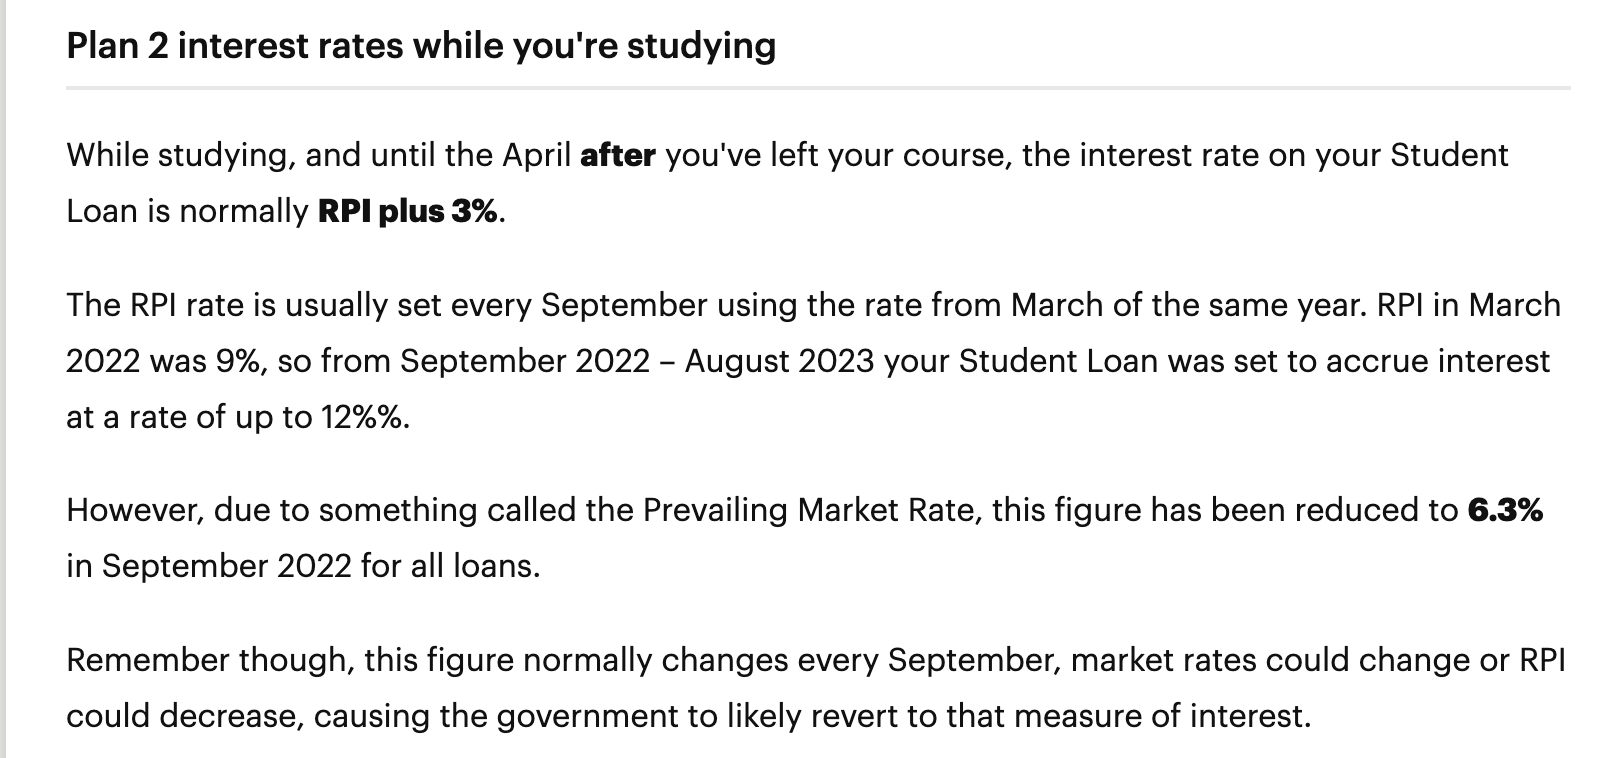 PrevailingMarketRate cap. From https://www.savethestudent.org/student-finance/student-loan-repayments.html#plan2